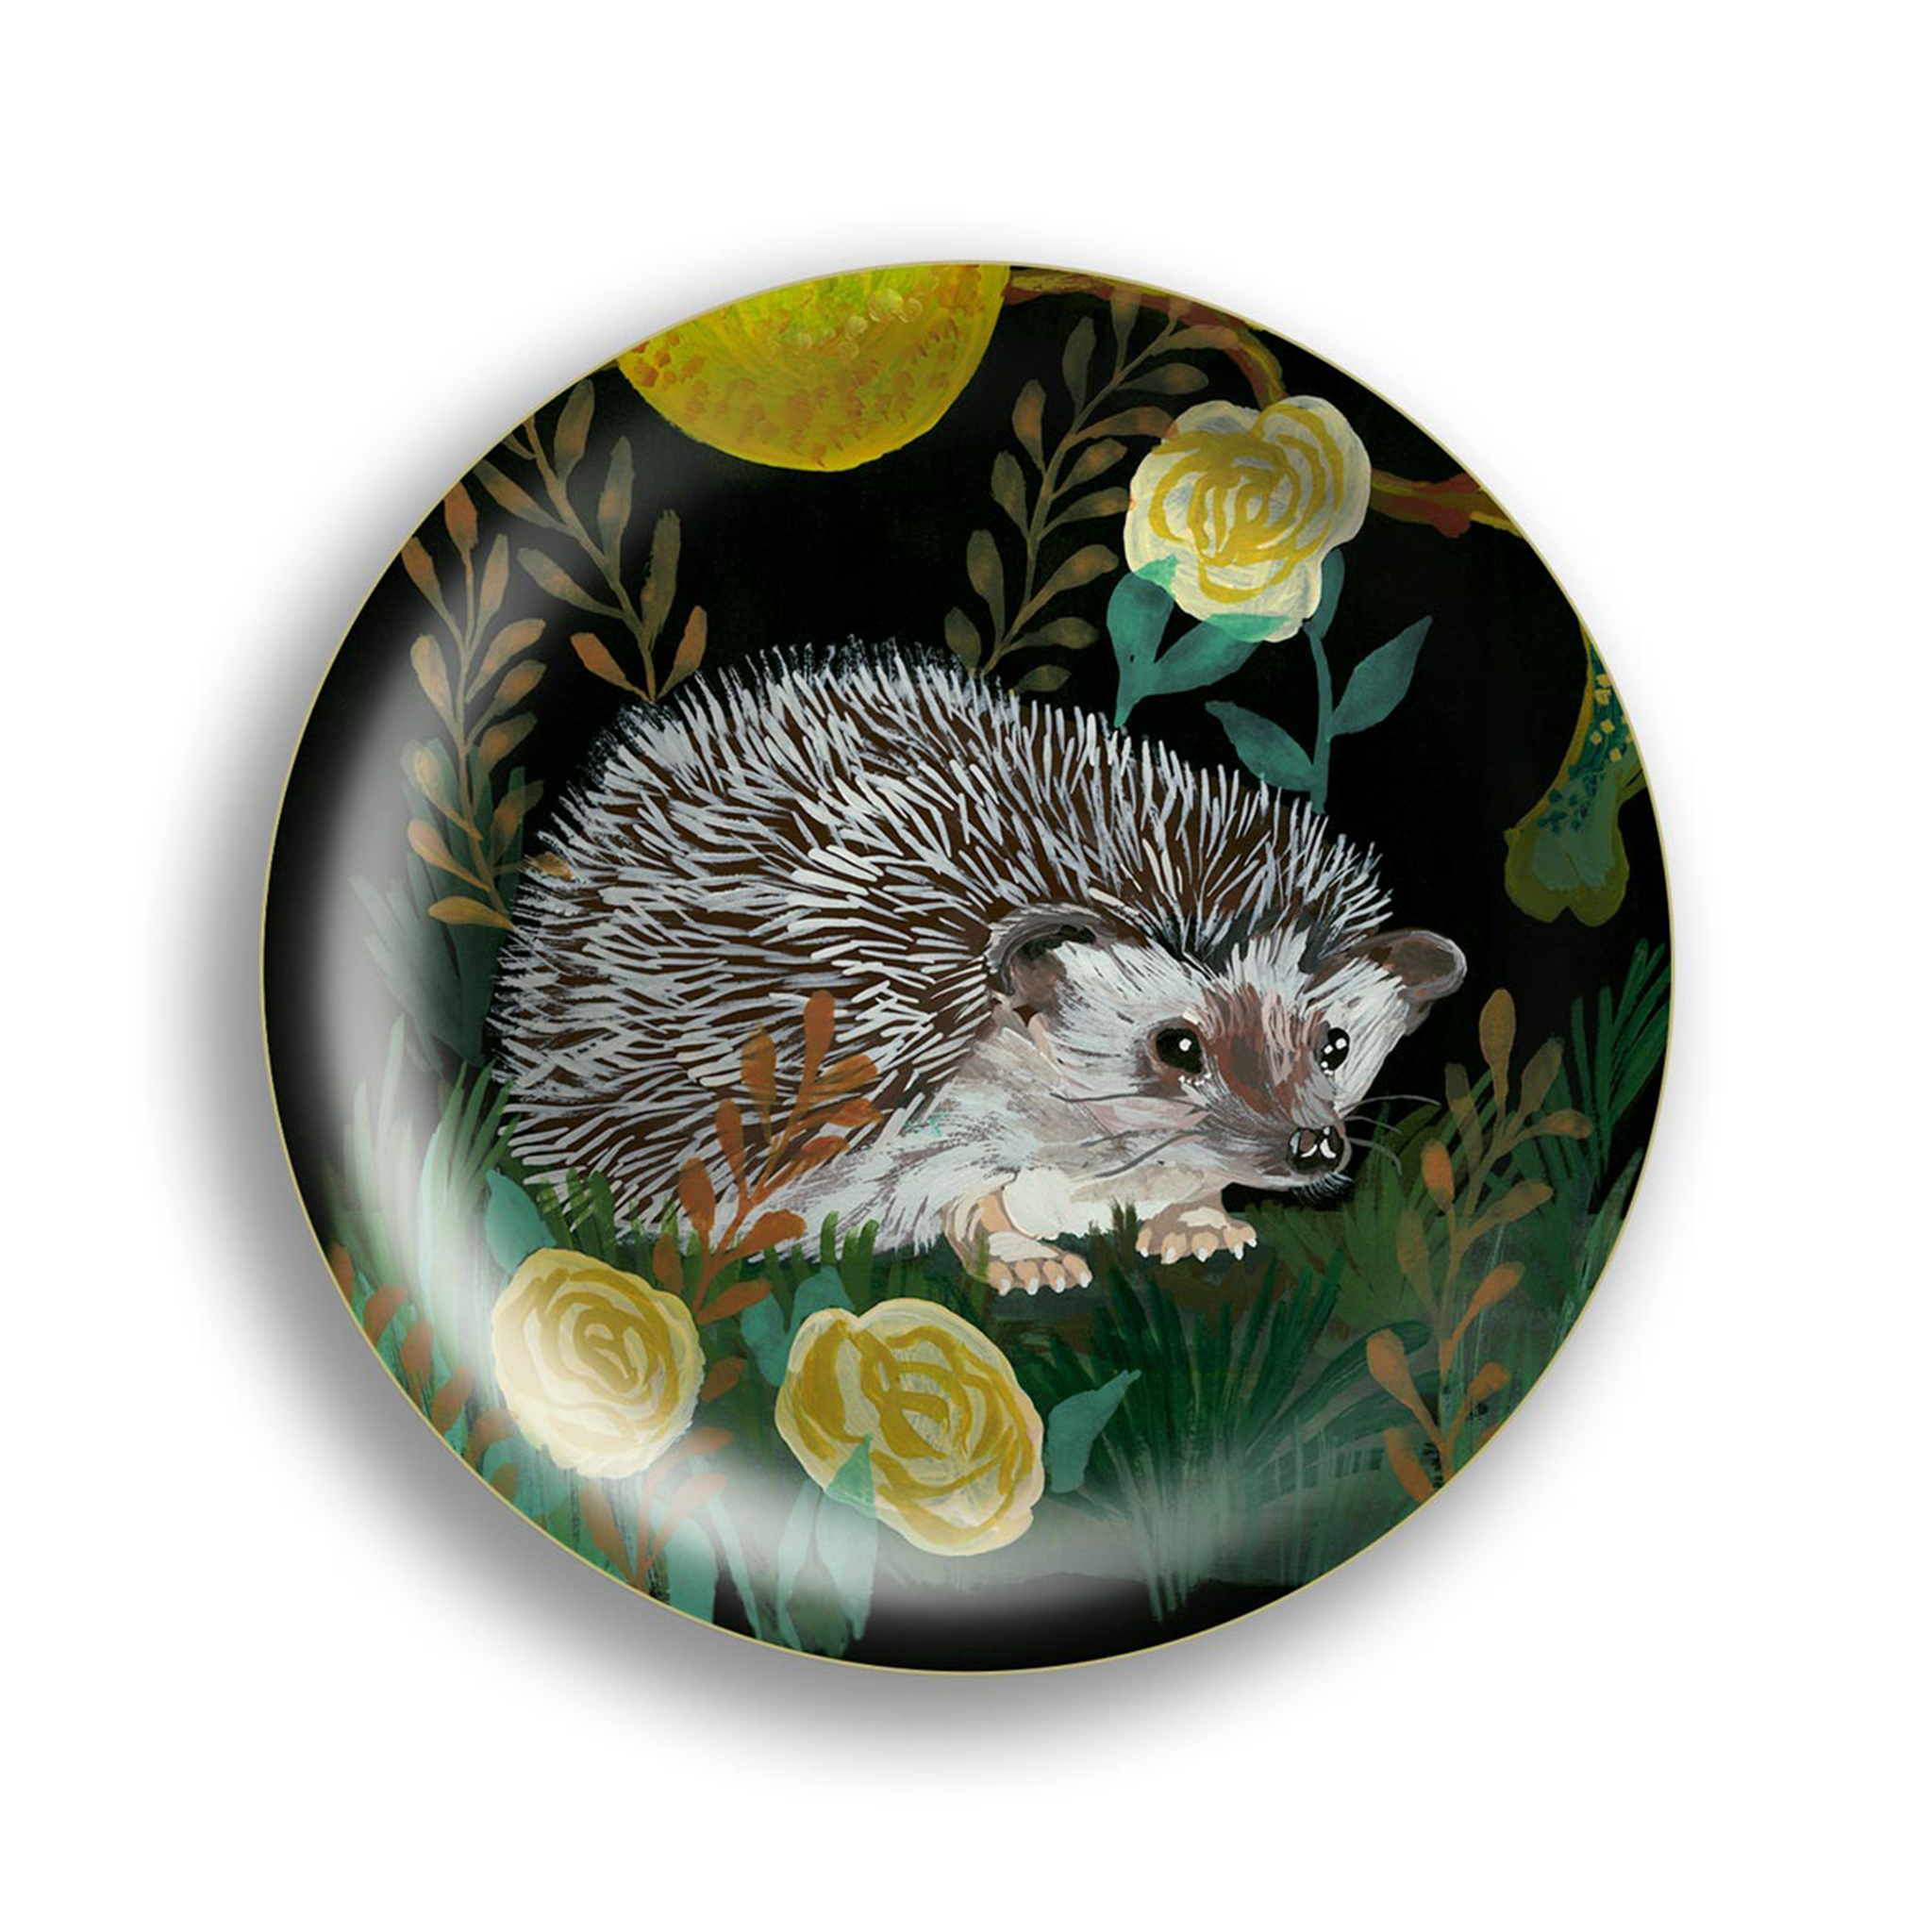 Decorative round tray coaster with a hedgehog illustration surrounded by floral patterns